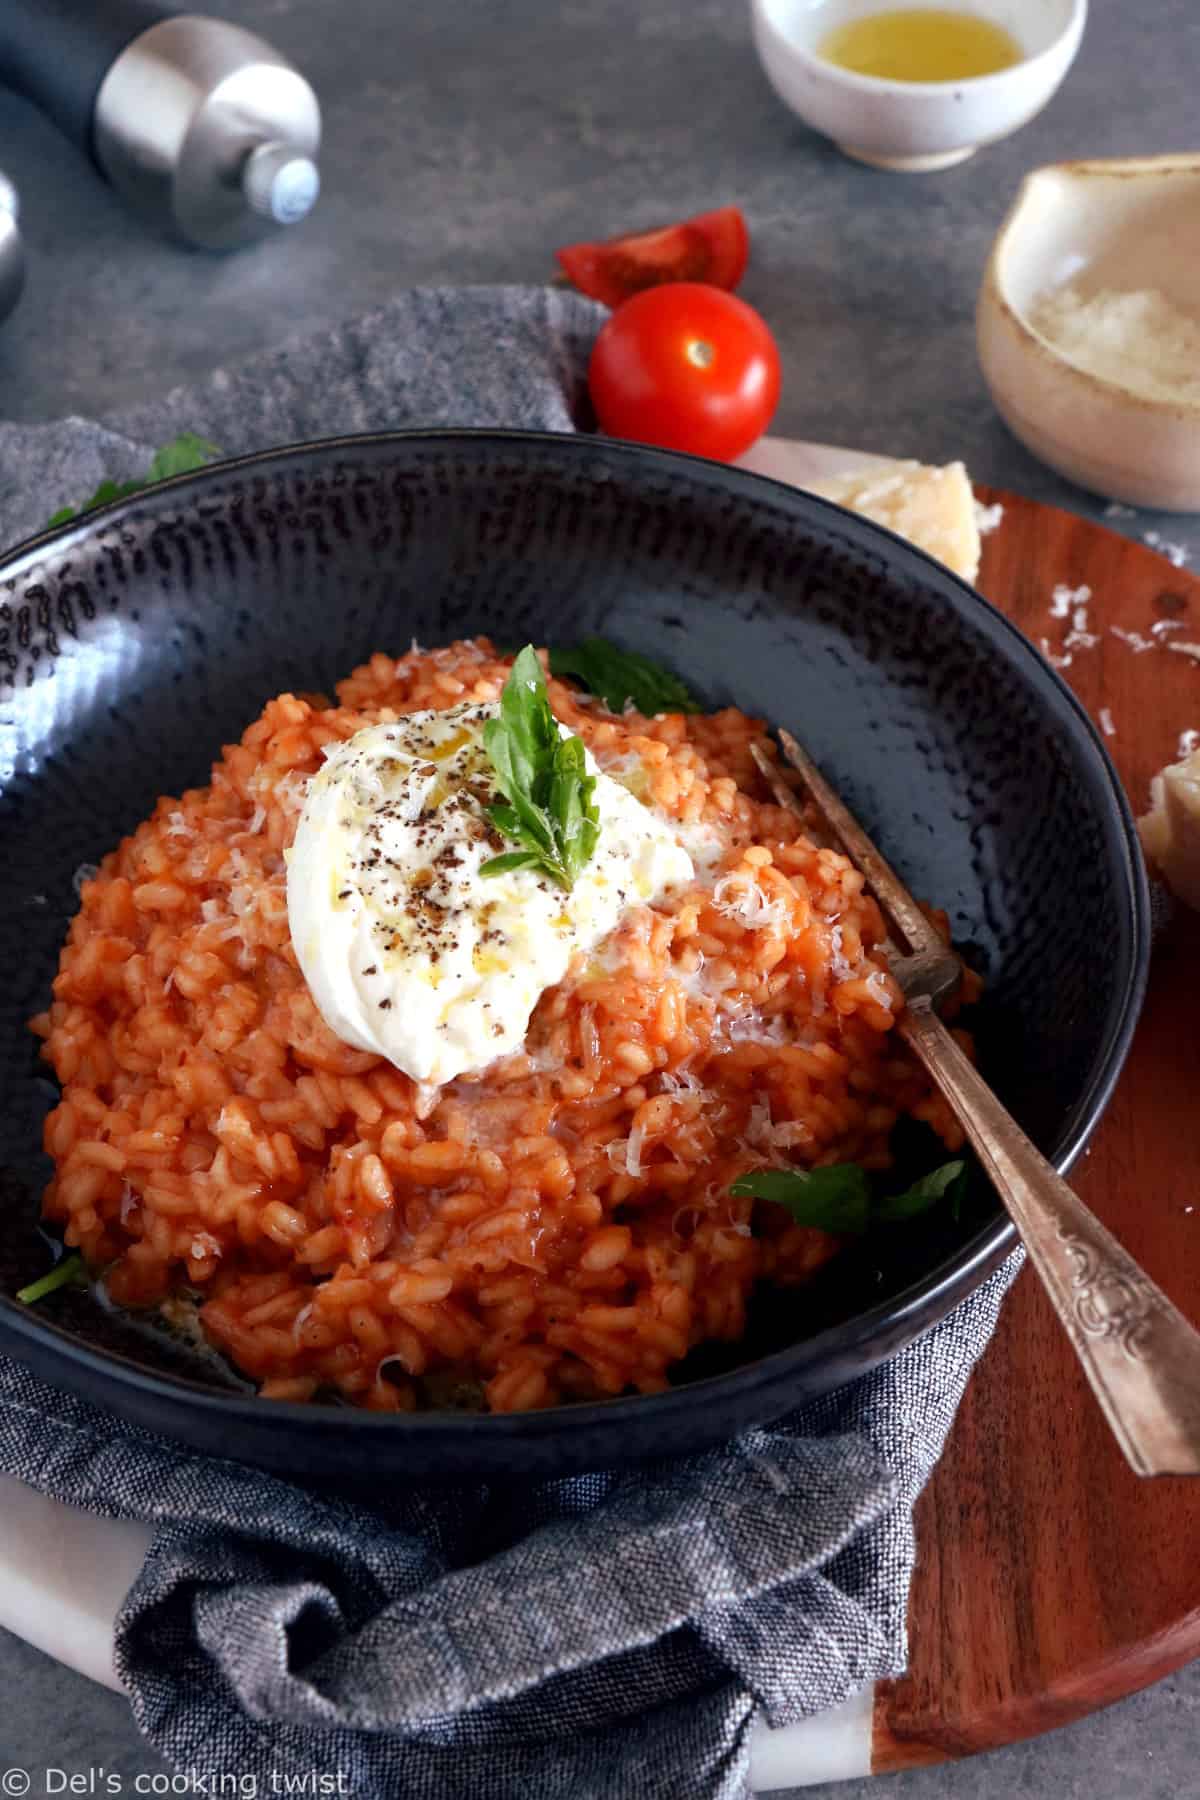 This spicy tomato risotto with burrata cheese is not your regular risotto. Subtly spiced up with harissa, it is packed with juicy and garlicky flavors with a little spicy kick.